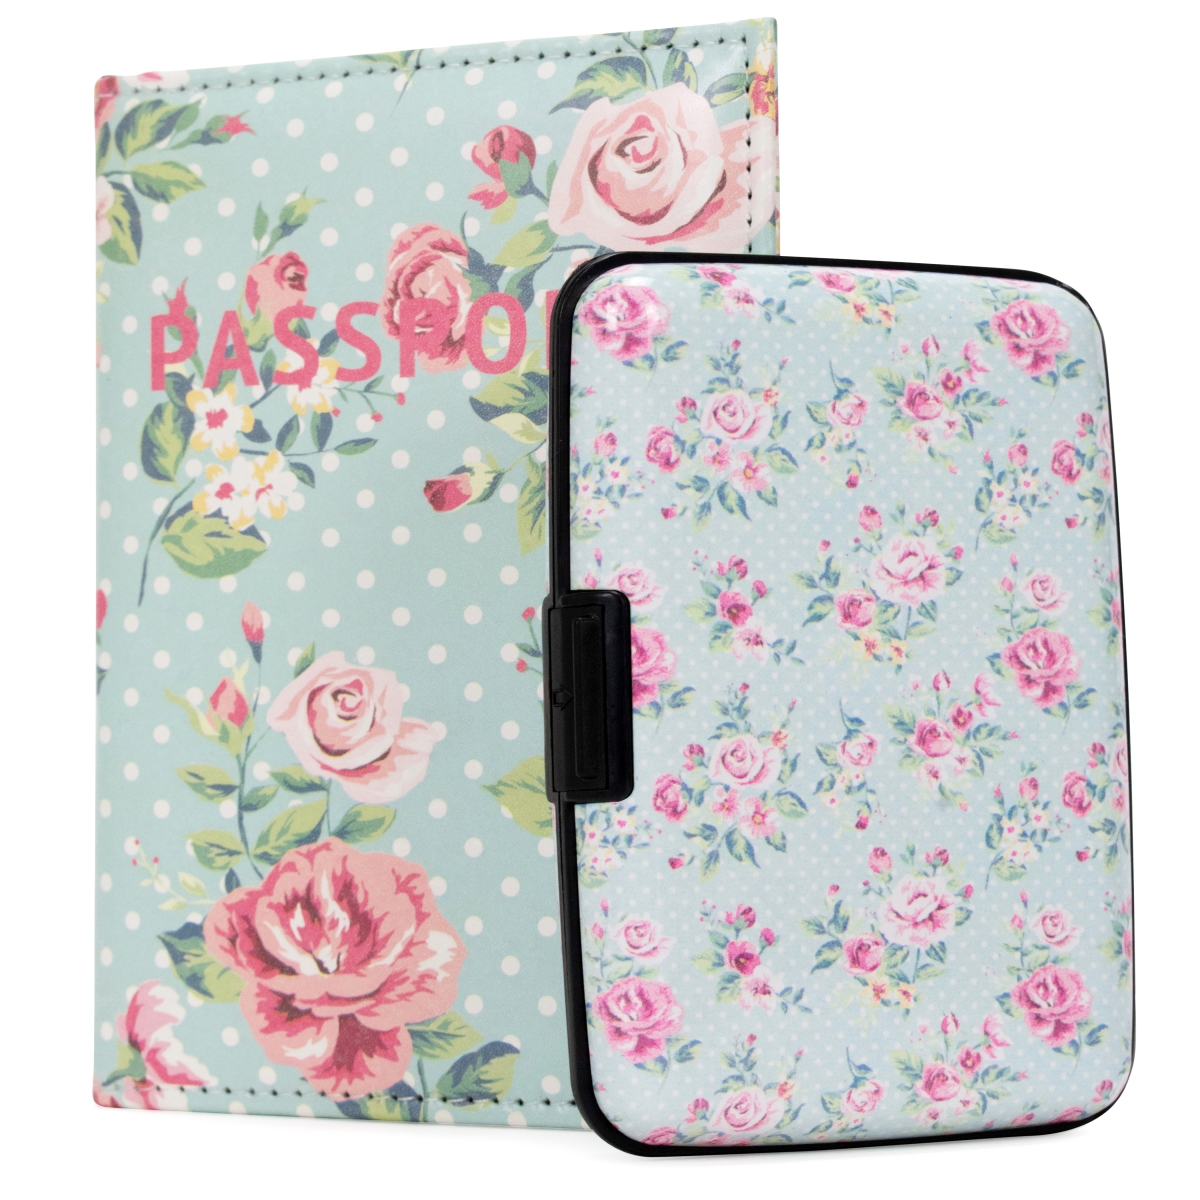 Miami CarryOn RFIDWSVTRS RFID Protected Wallet and Passport Cover Set (Vintage Roses) -  Naftali Inc